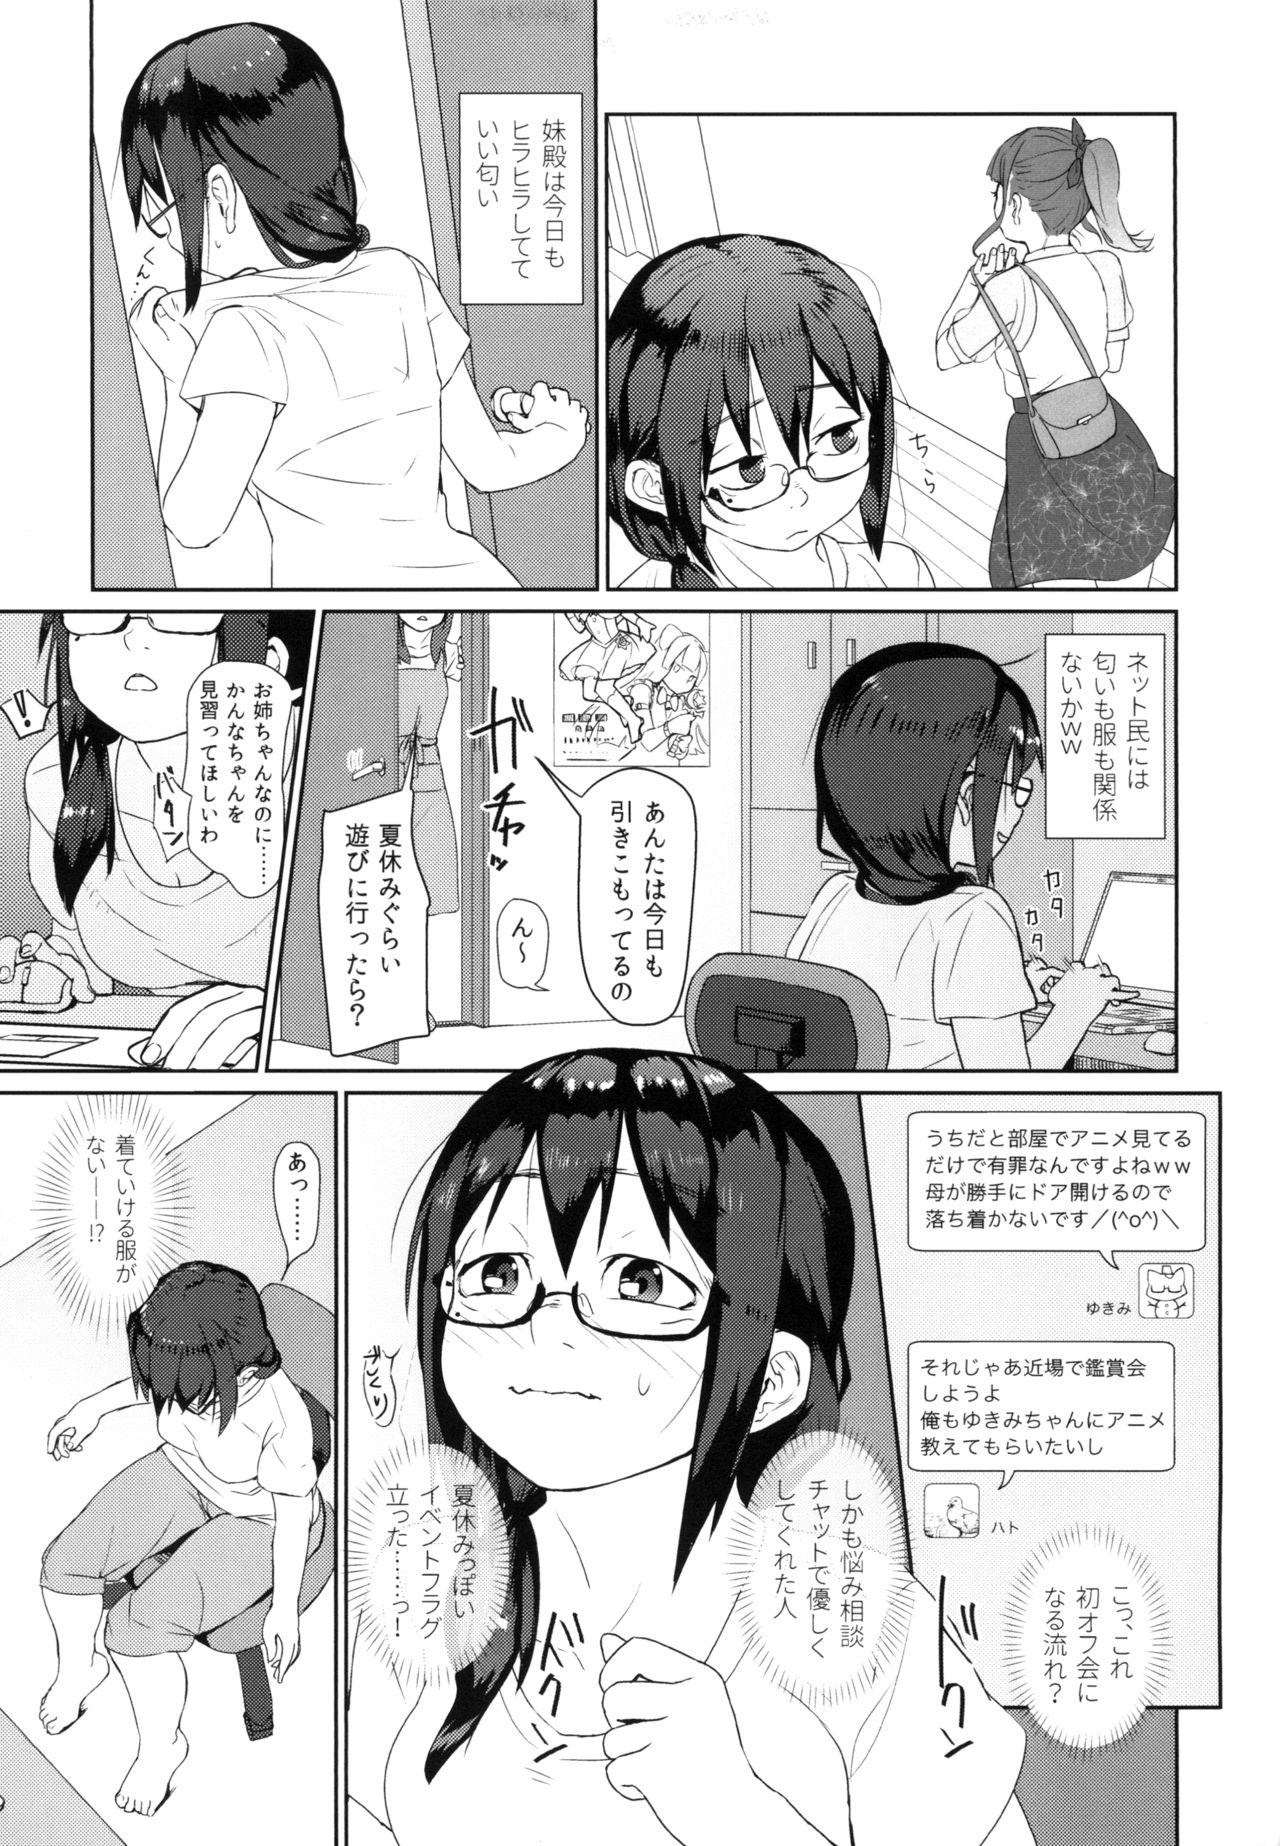 Playing ハンネしか知らない Social Net-Sex - Original Chubby - Page 5